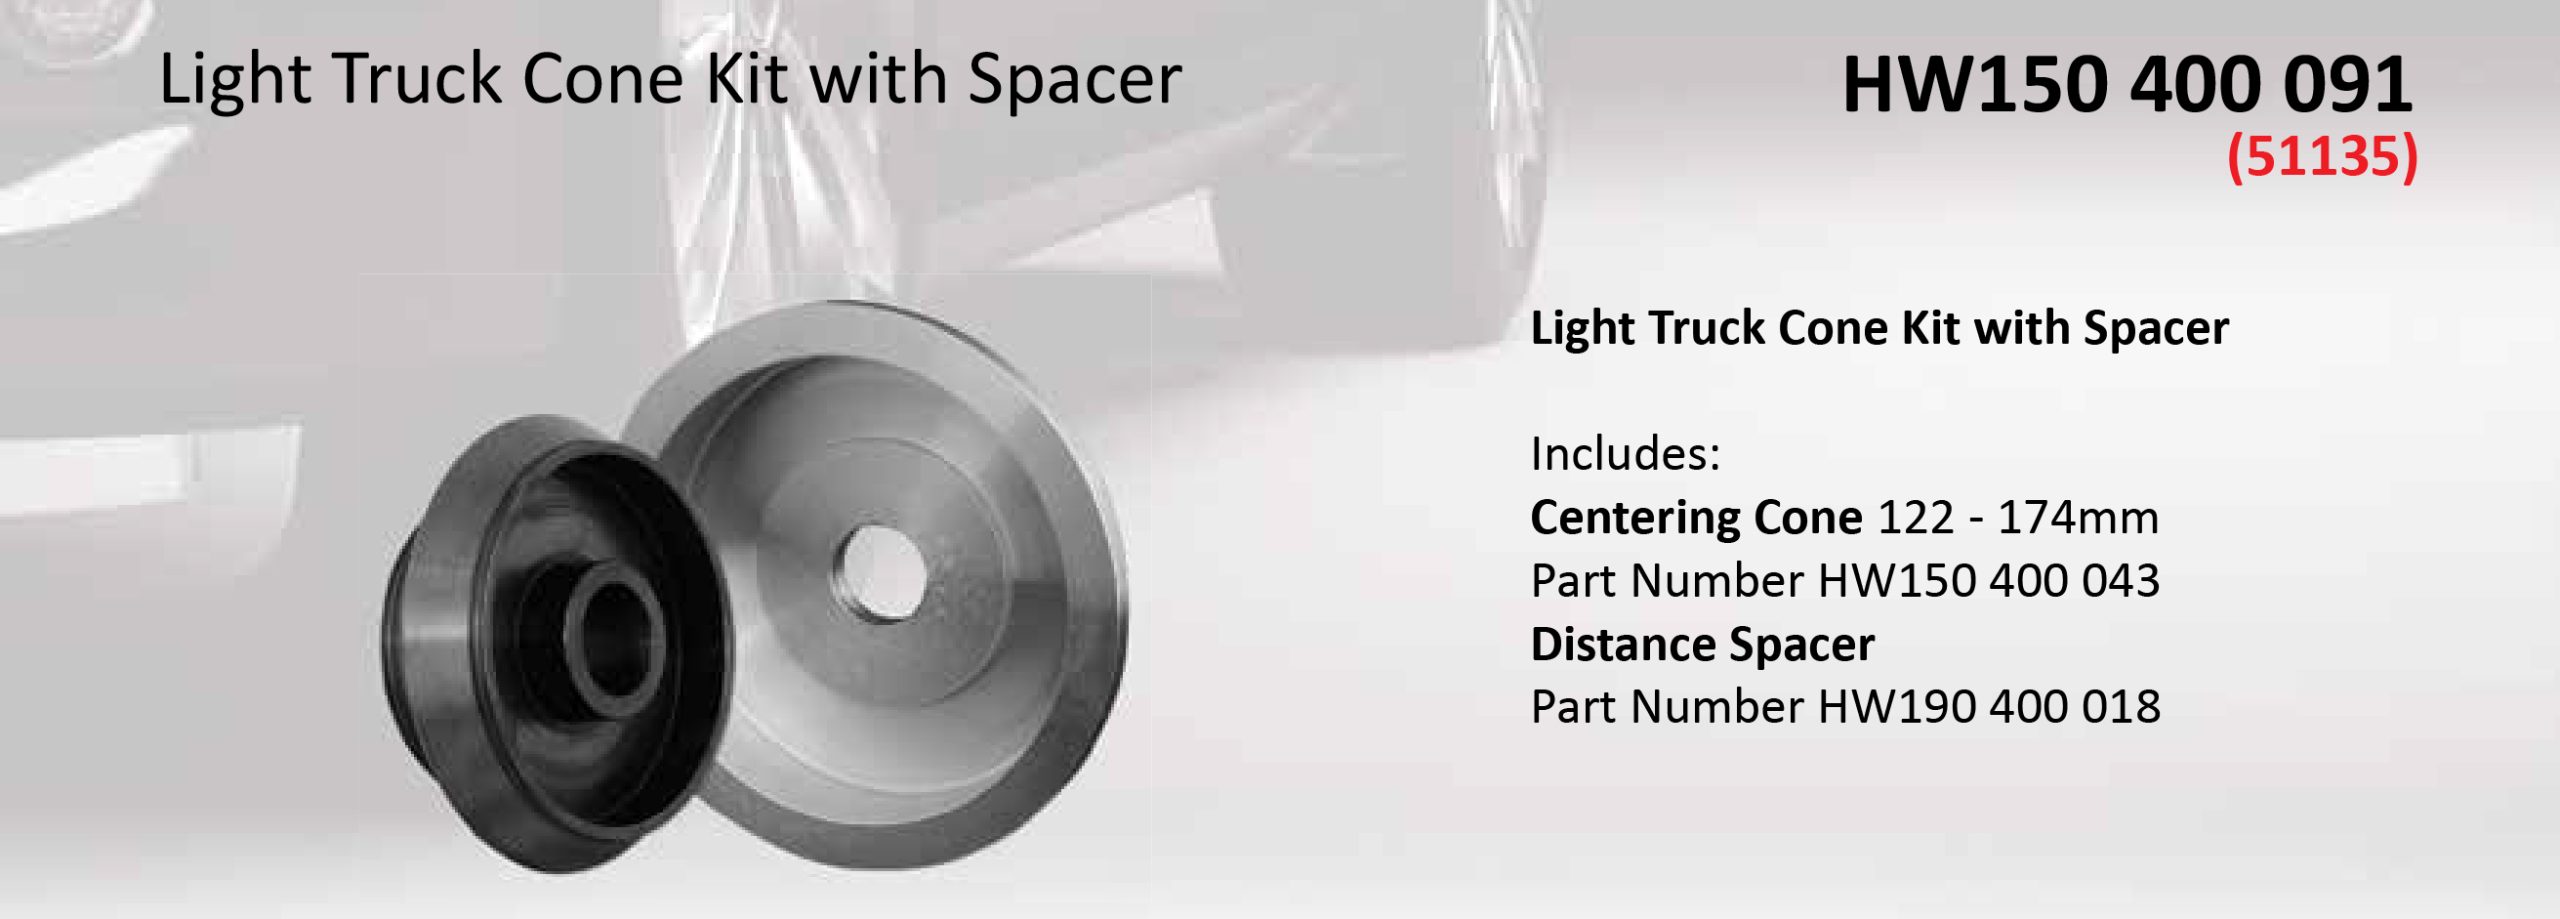 Haweka Light truck cone and spacer kit scaled